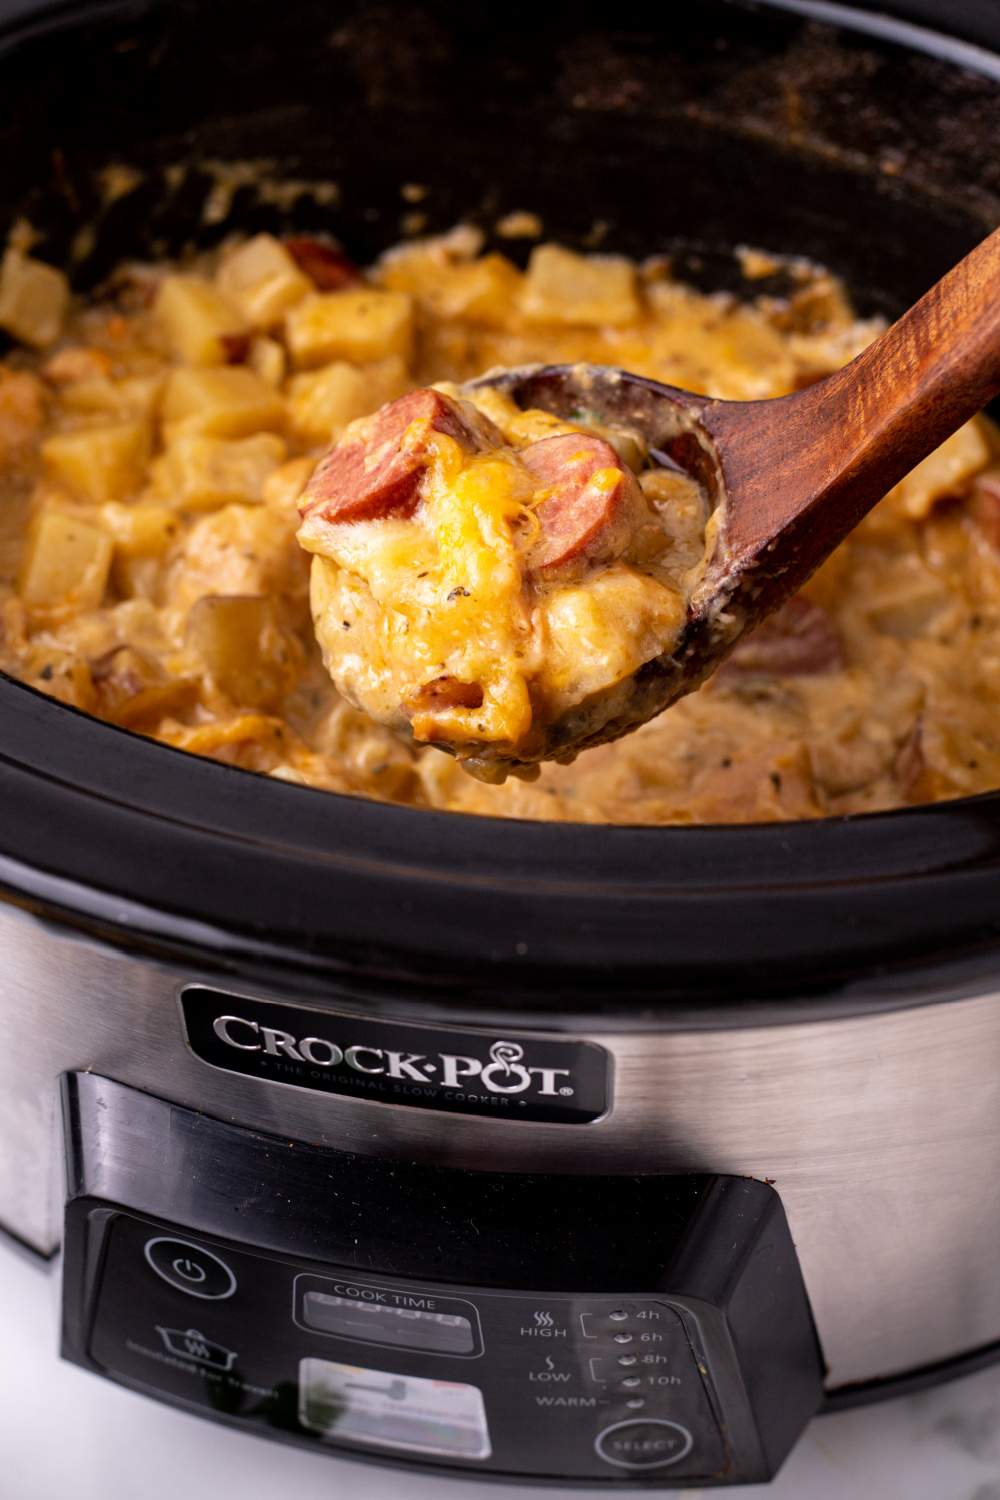 Crockpot Cheesy Chicken, Sausage, and Potato Casserole in slow cooker